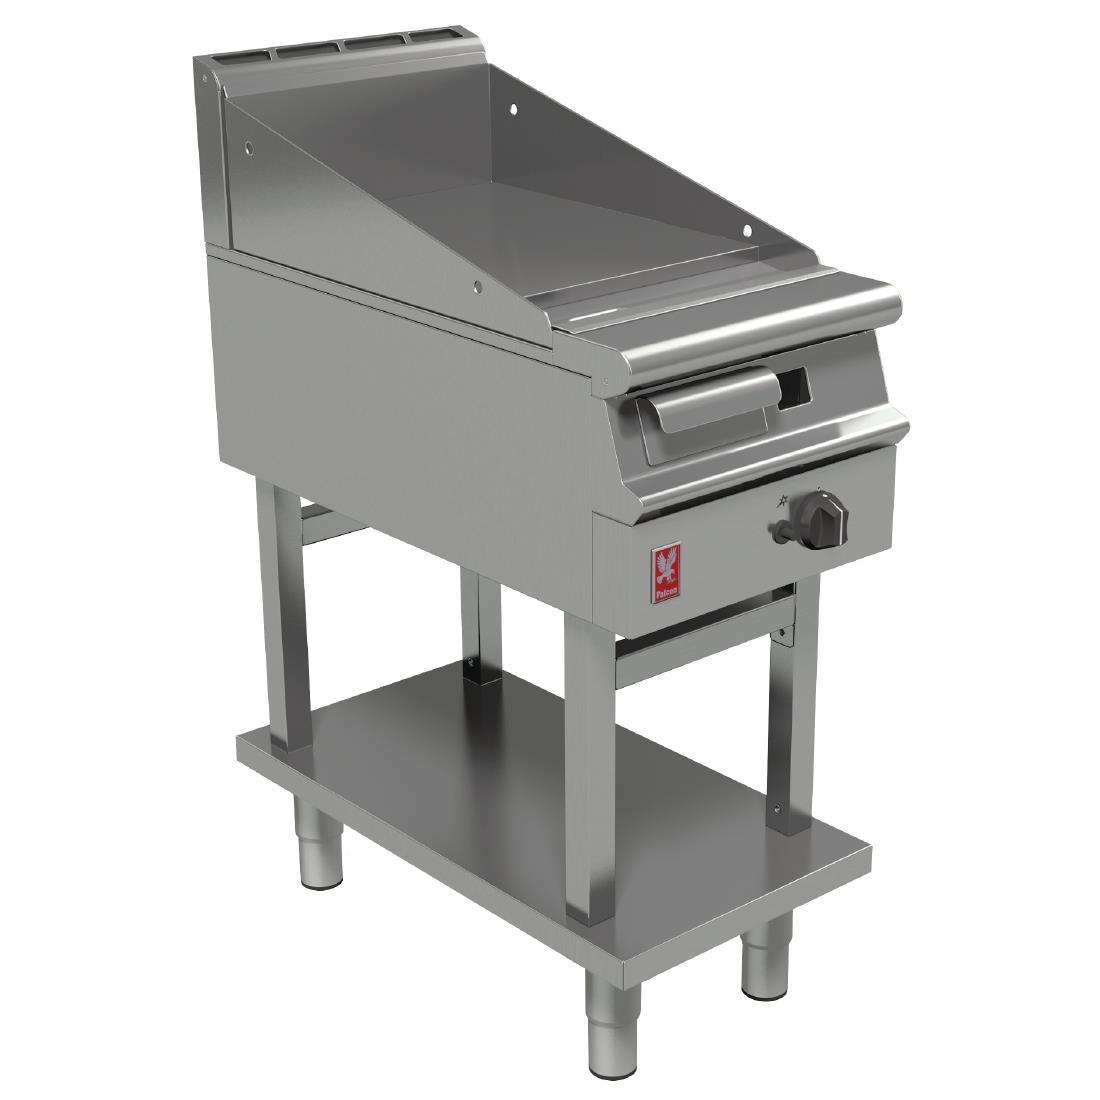 Falcon Dominator Plus 400mm Wide Smooth Natural Gas Griddle on Fixed Stand G3441 - GP036-N  - 1